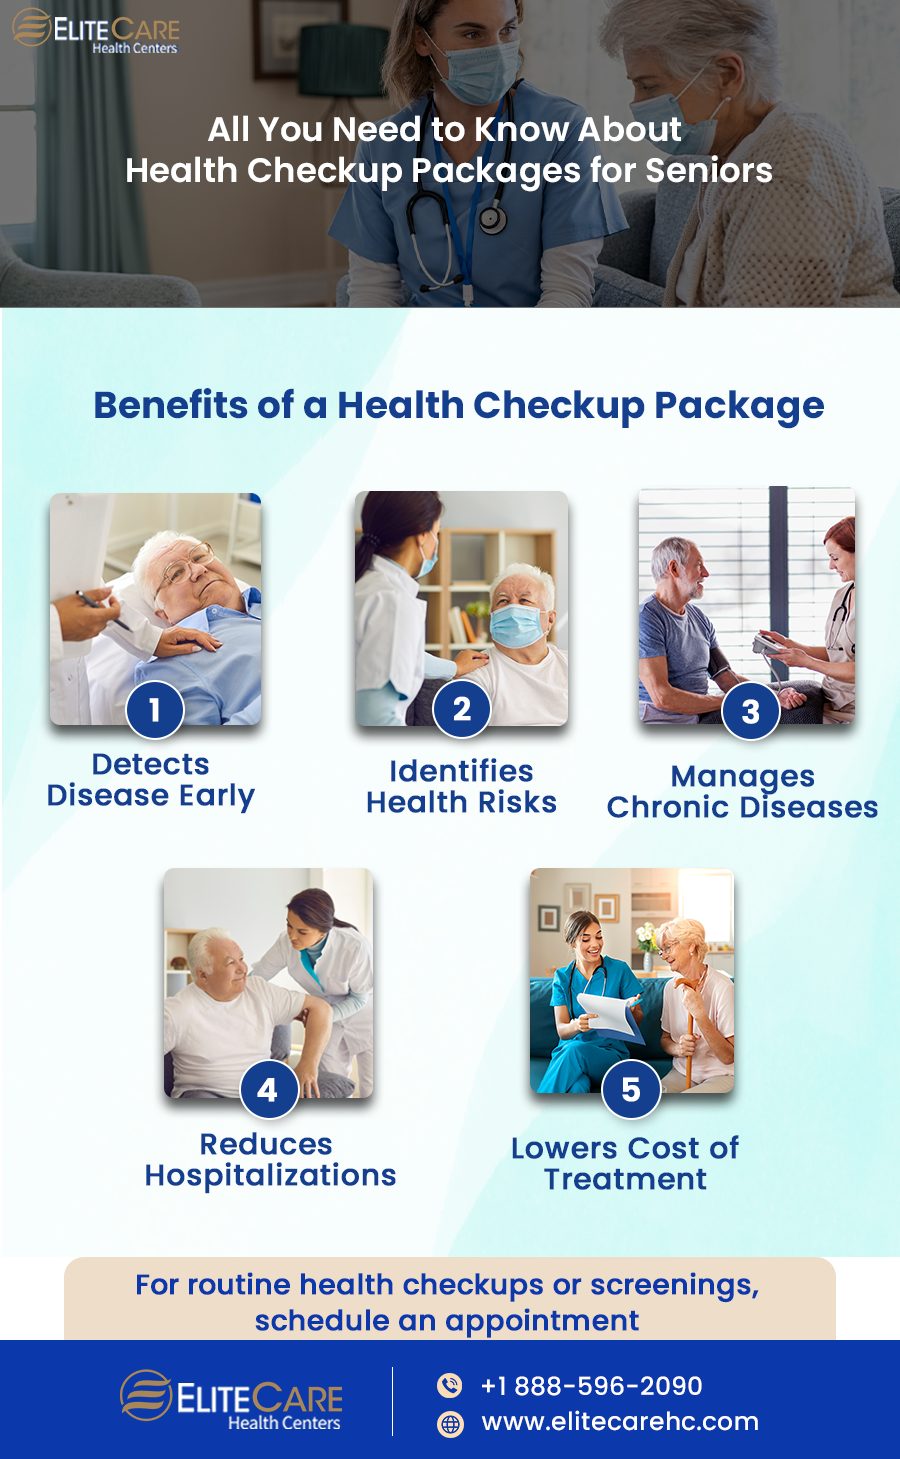 All You Need to Know About Health Checkup Packages for Seniors | Infographic